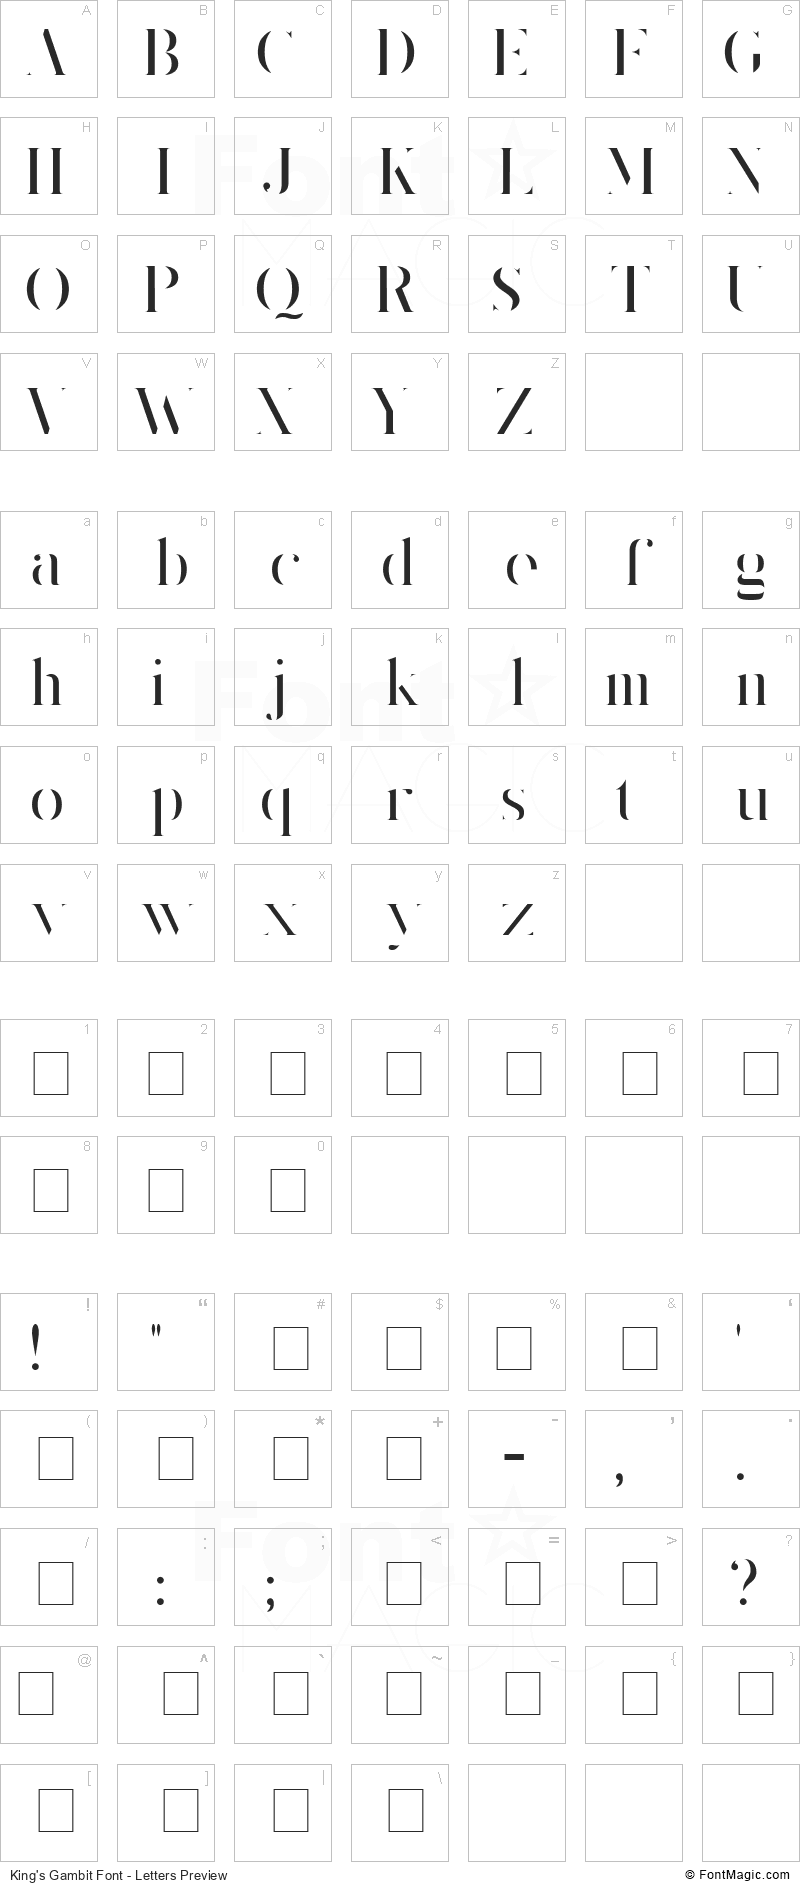 King’s Gambit Font - All Latters Preview Chart